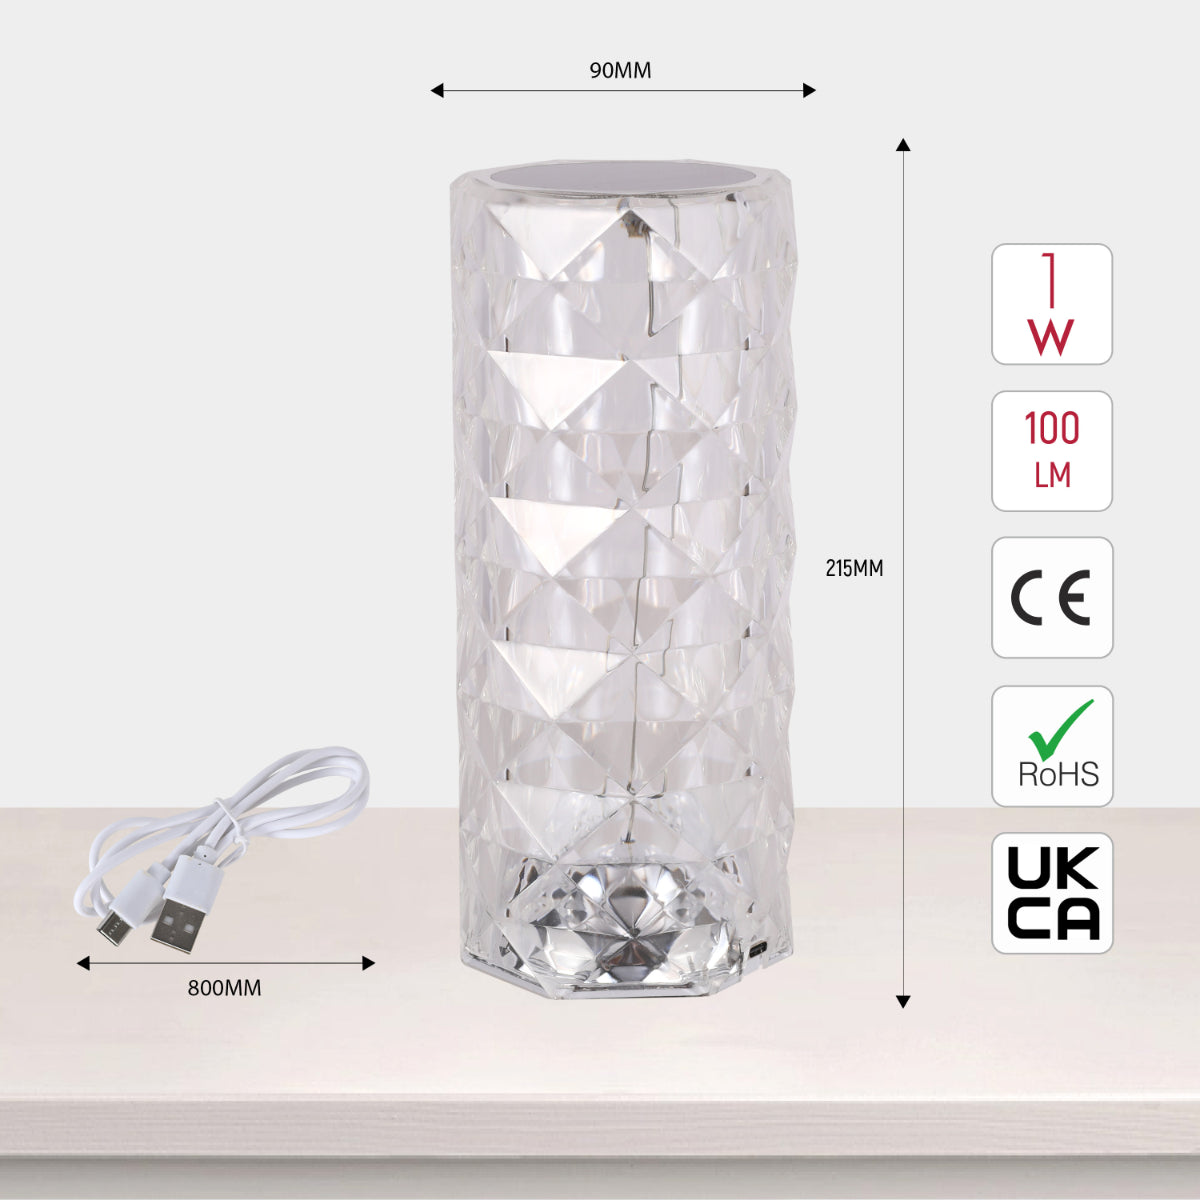 Size and certifications of Crystal Beam Rechargeable Cylinder Lamp 130-03718